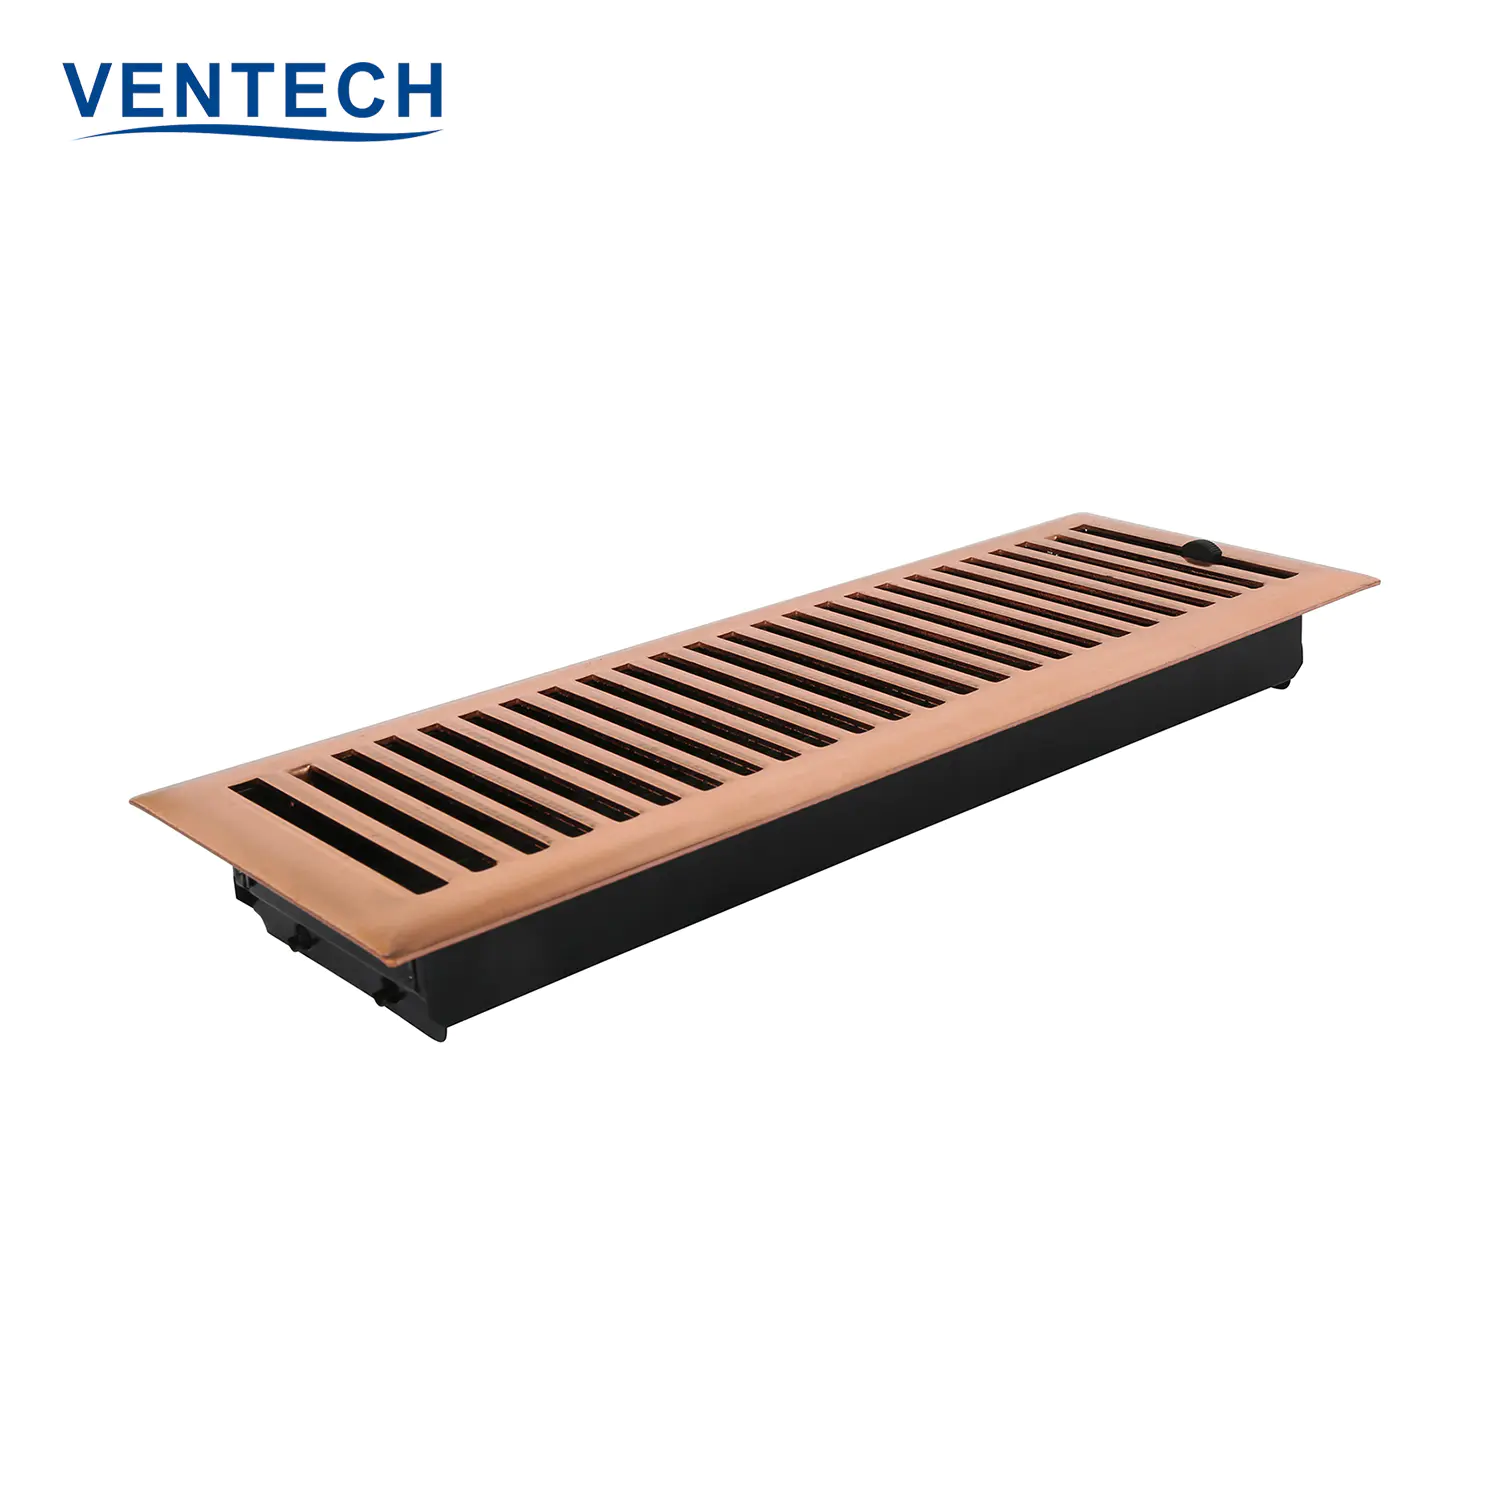 VENTECH Exhaust Wholesale High Quality Hvac System Conditioning Supply Fresh Air America Aluminum Ventilation Floor Vent Grilles